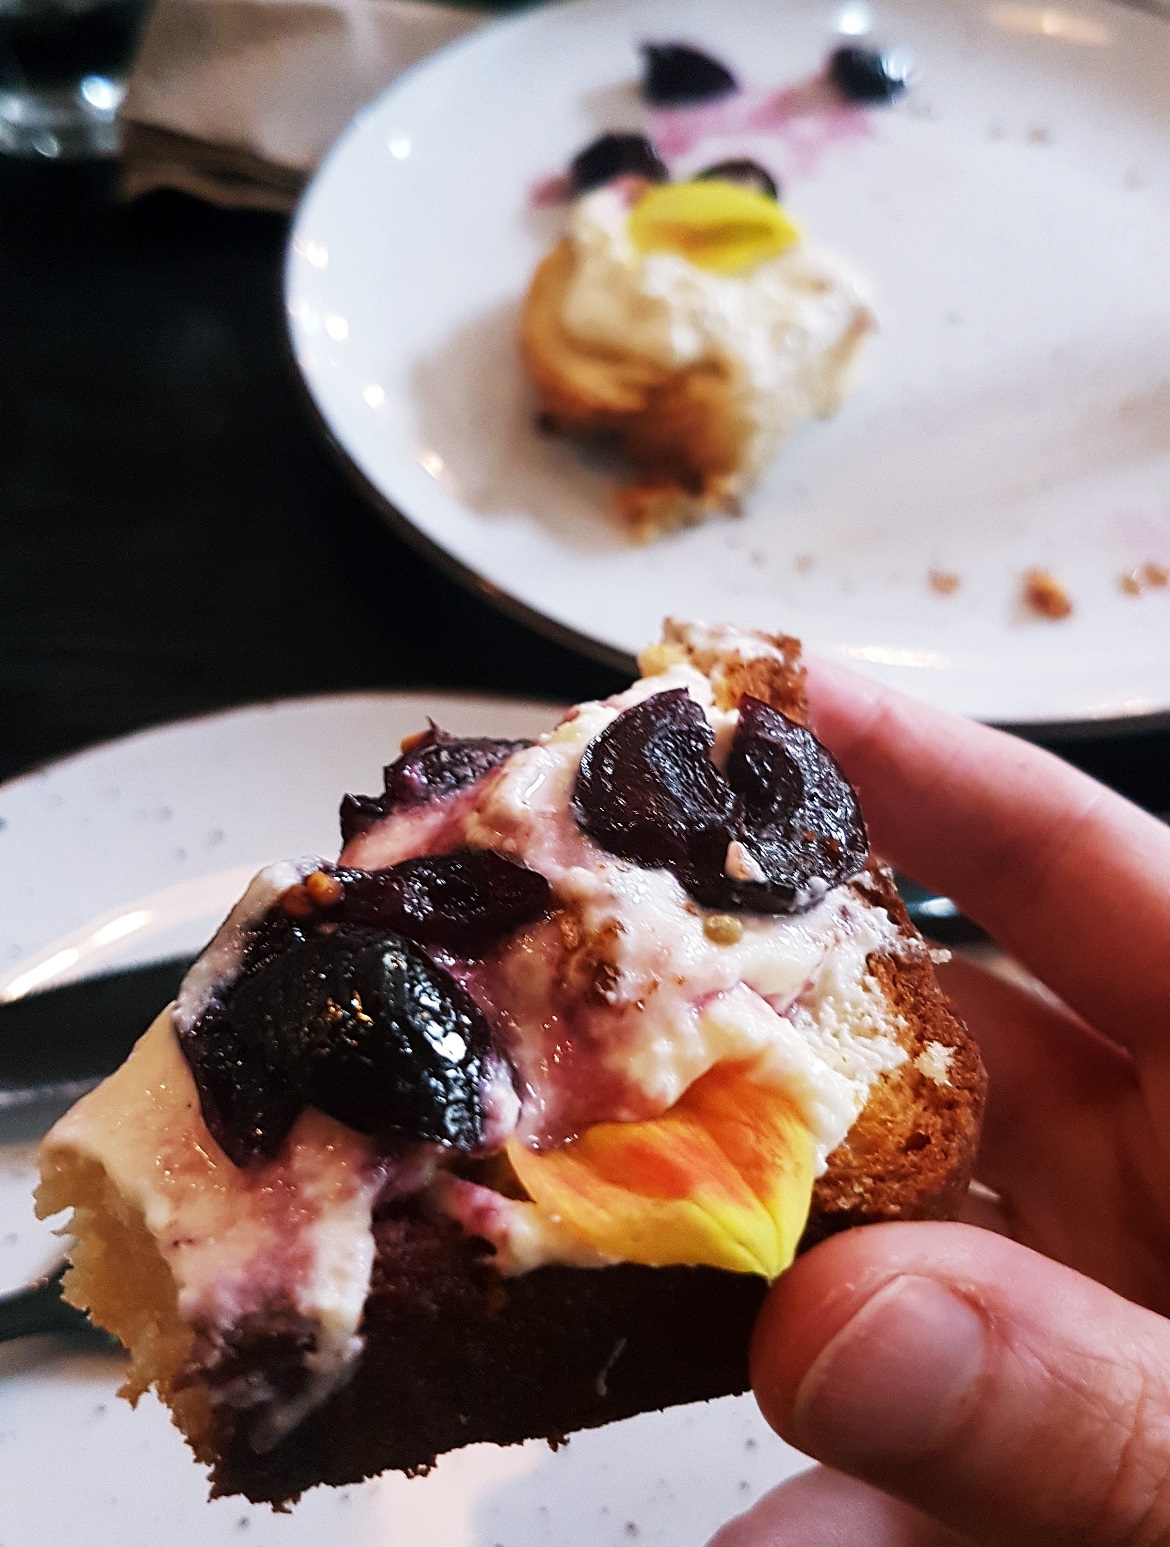 Vanilla cherries and ricotta on brioche - Review of North Star Coffee Shop by BeckyBecky Blogs